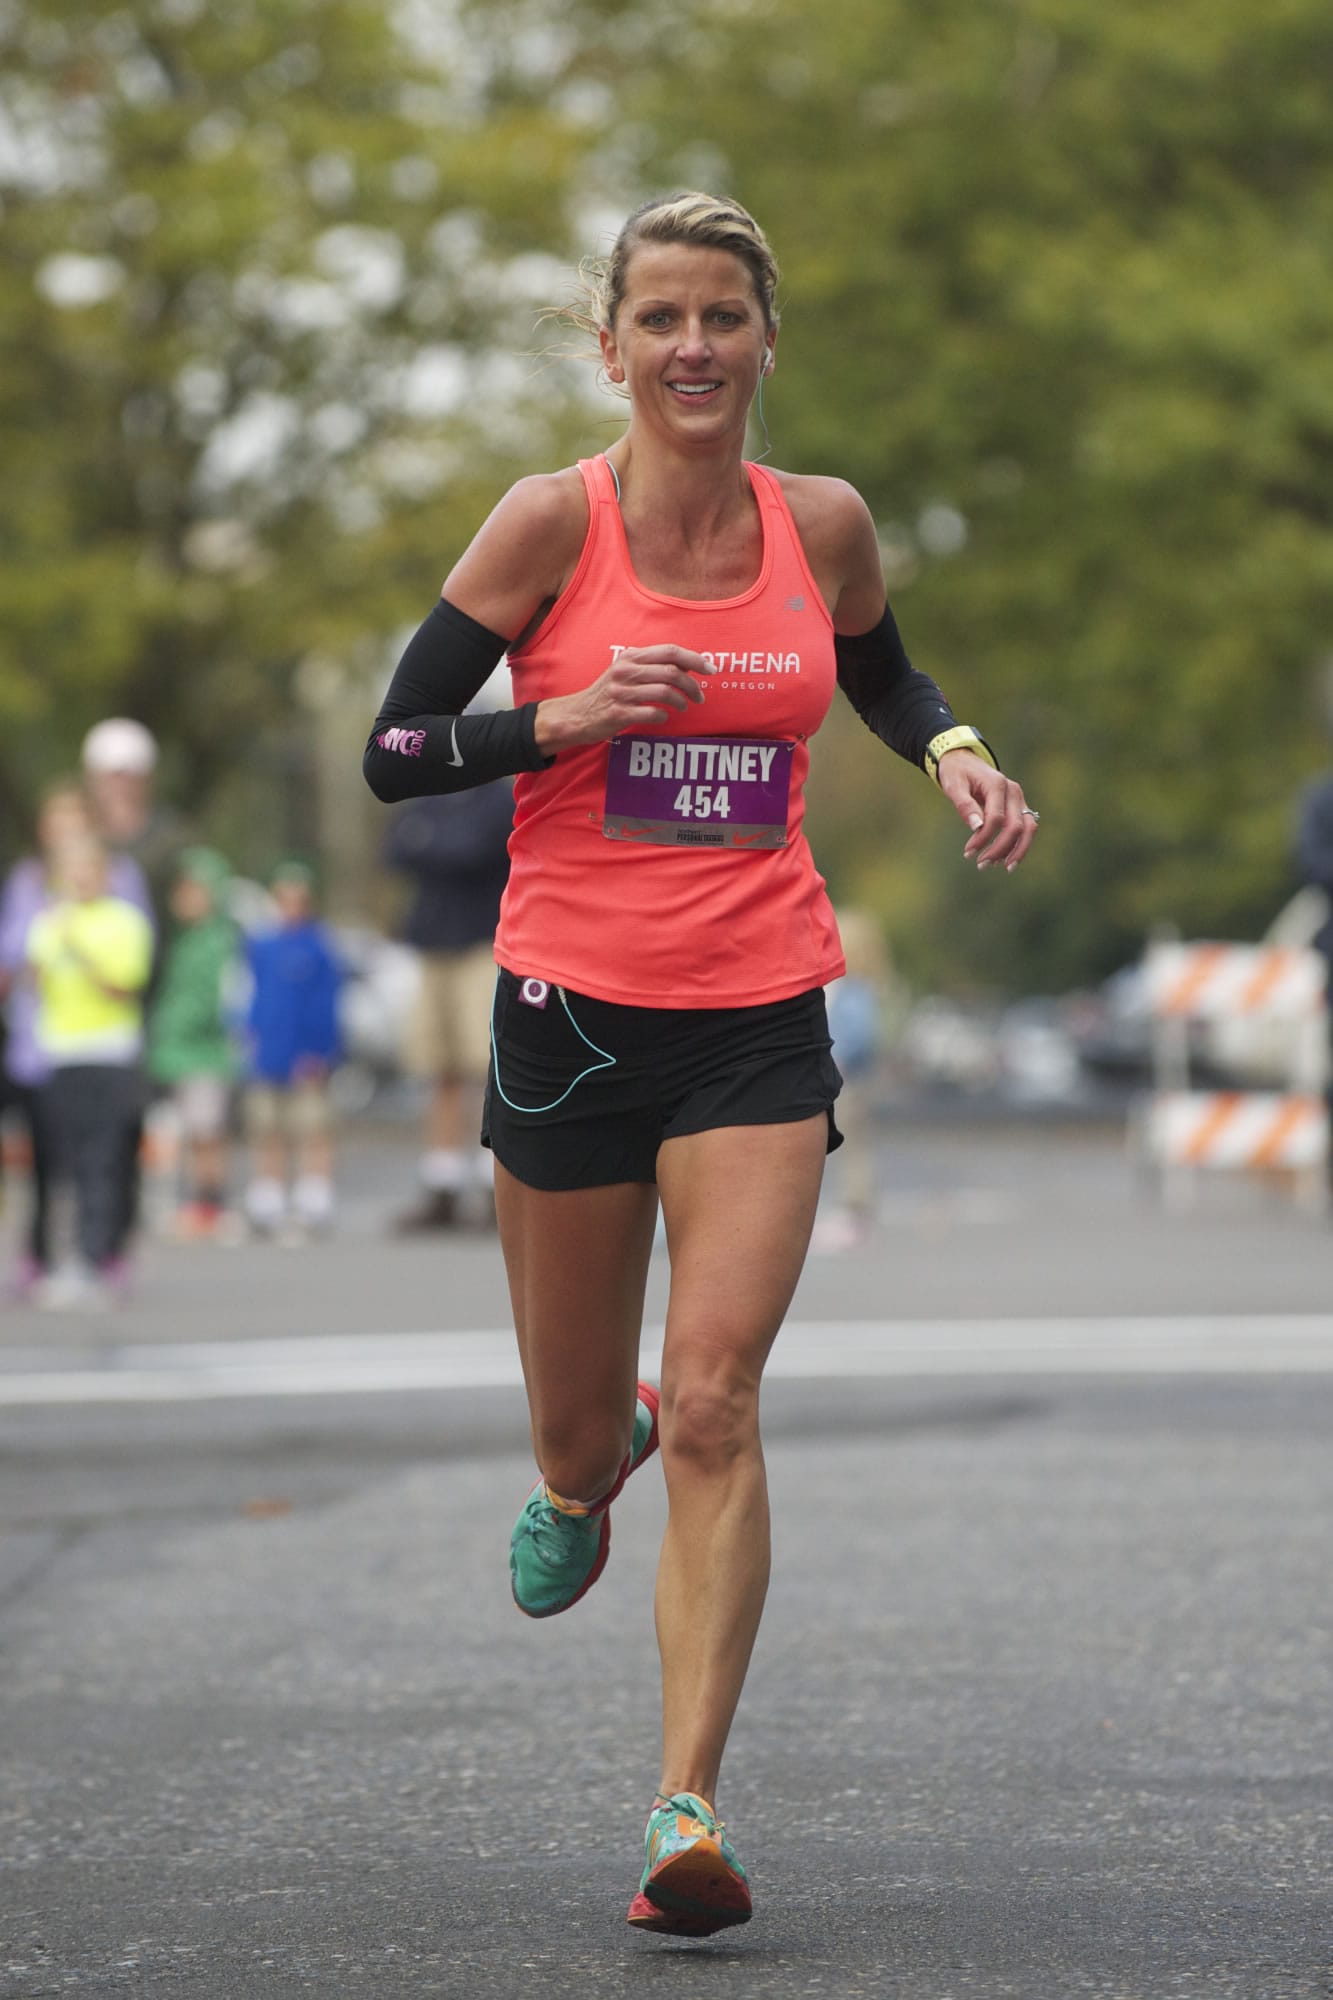 Brittney Forster, 39, of Beaverton, Ore.,, wins the 7th annual Girlfriends Half Marathon on a chilly Sunday morning. Proceeds from the 13.1 mile run will benefit Susan G.